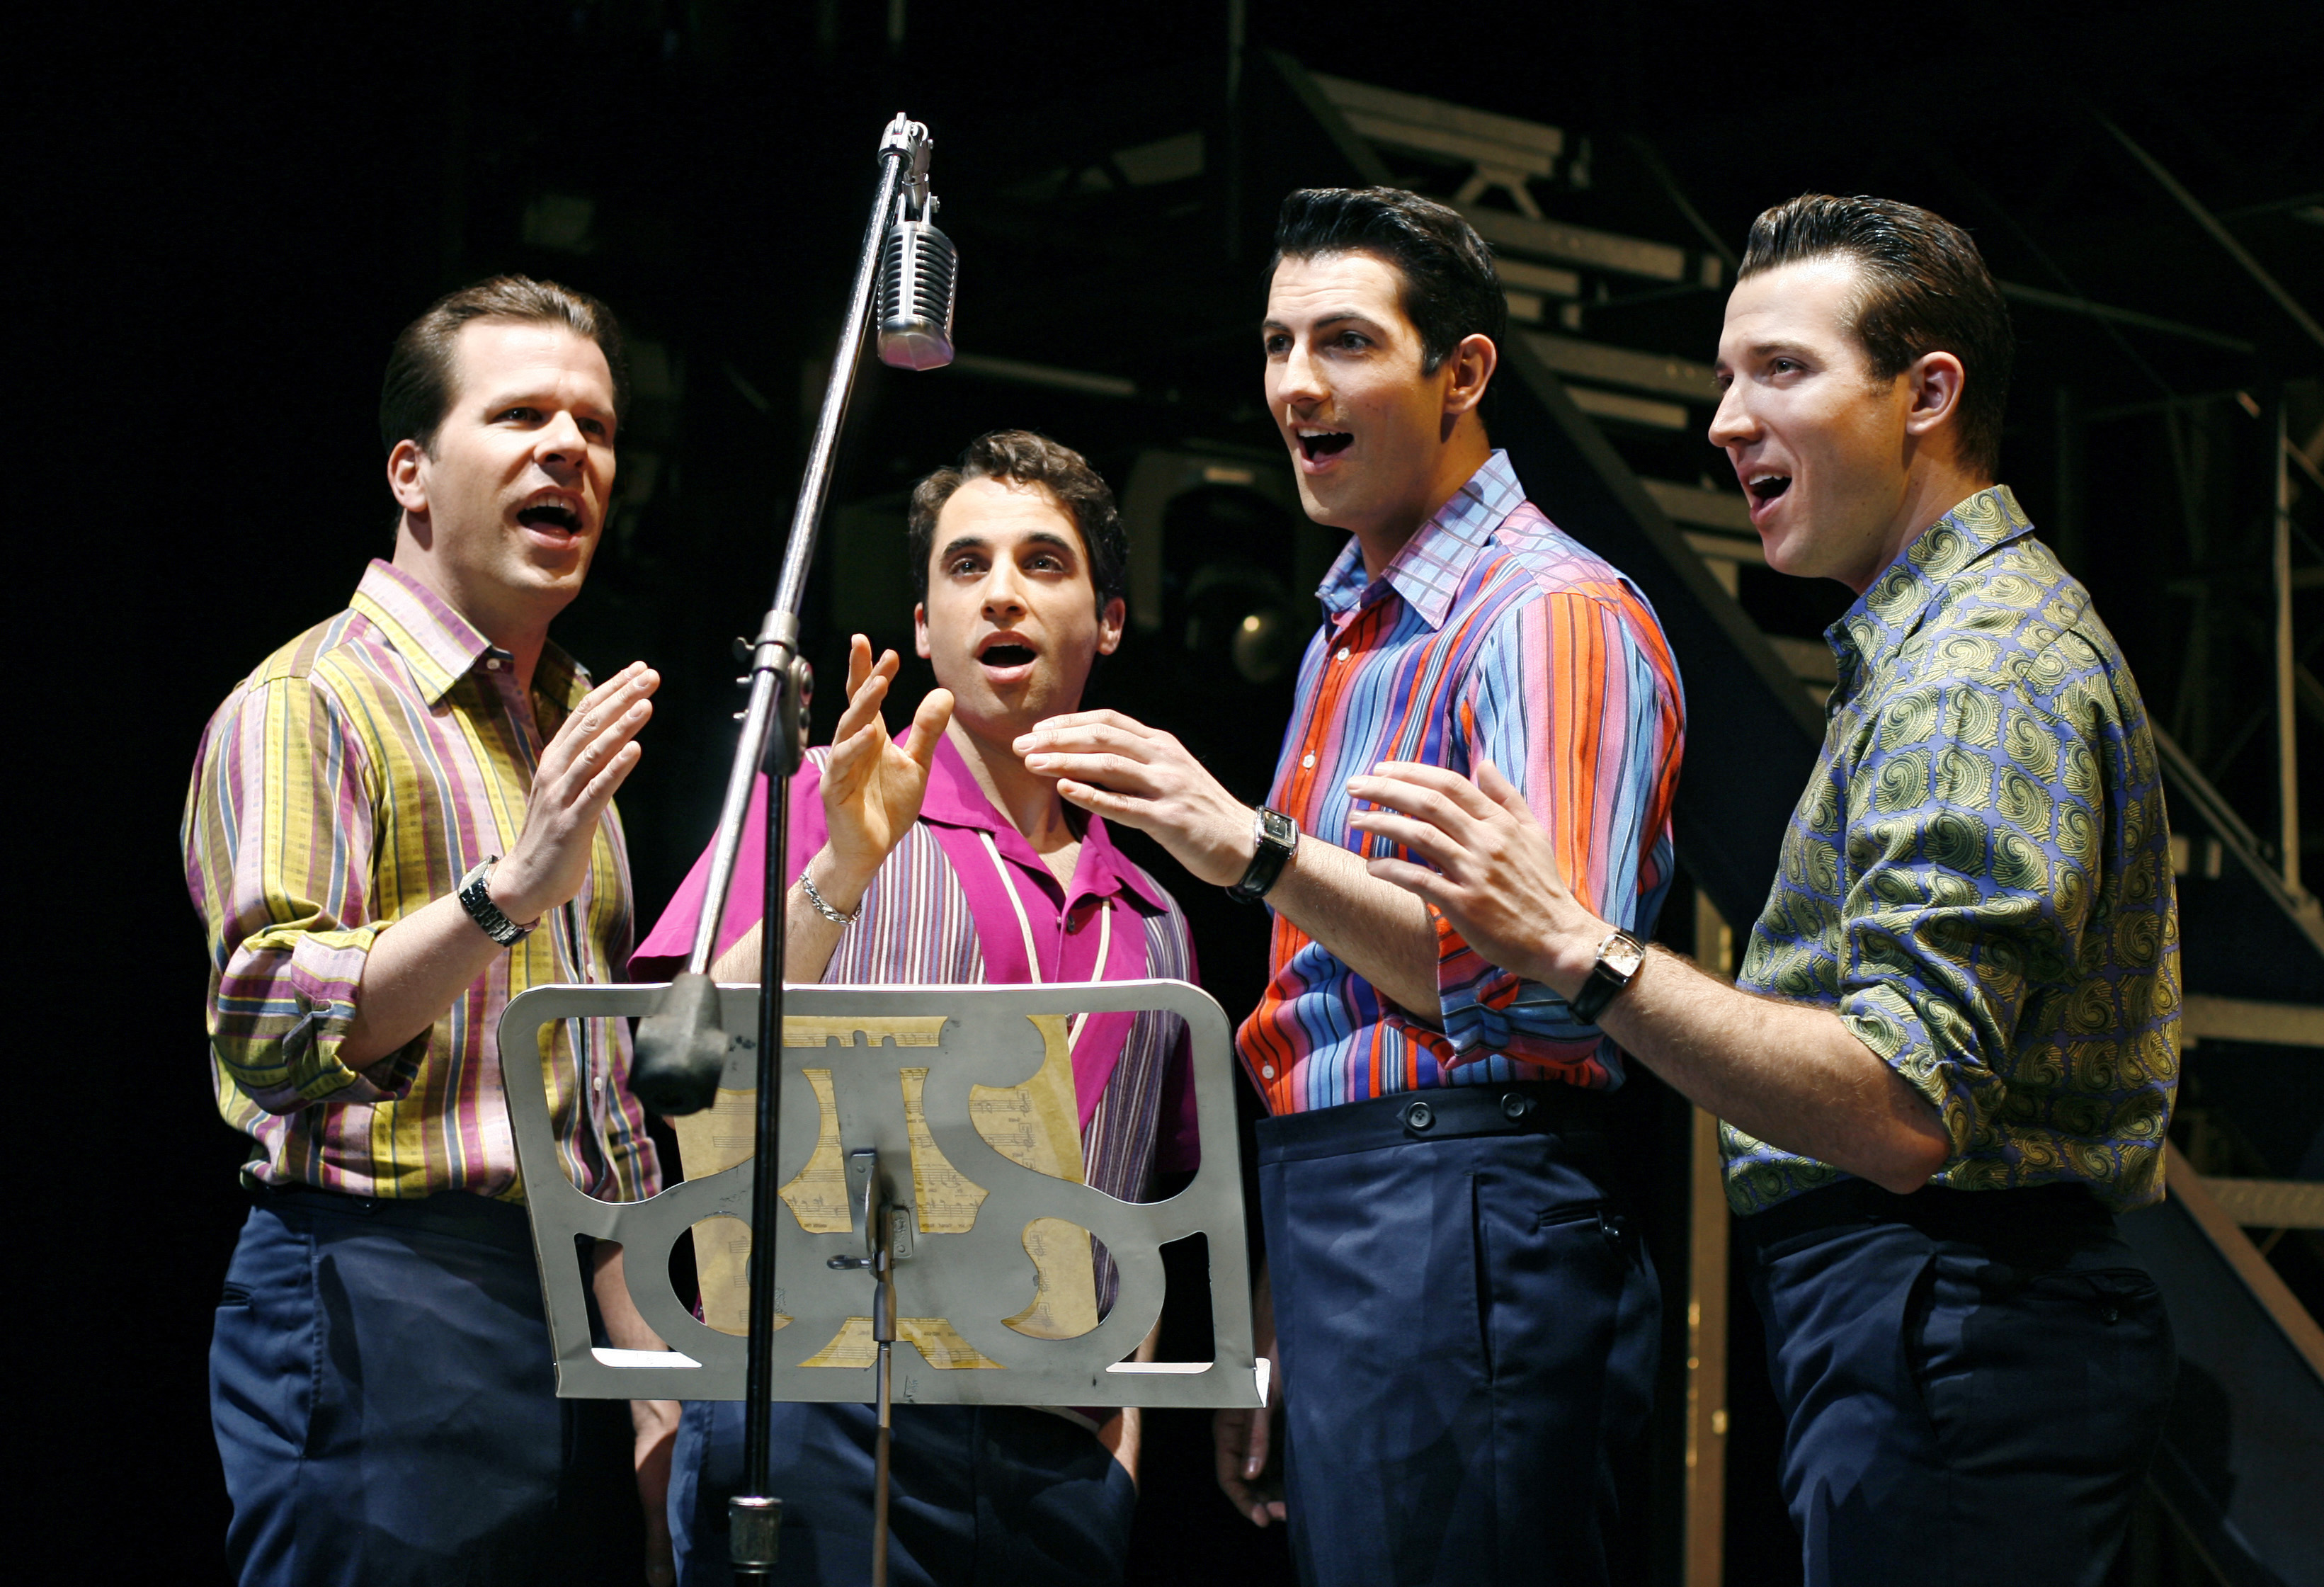 Egos and music collide in Jersey Boys